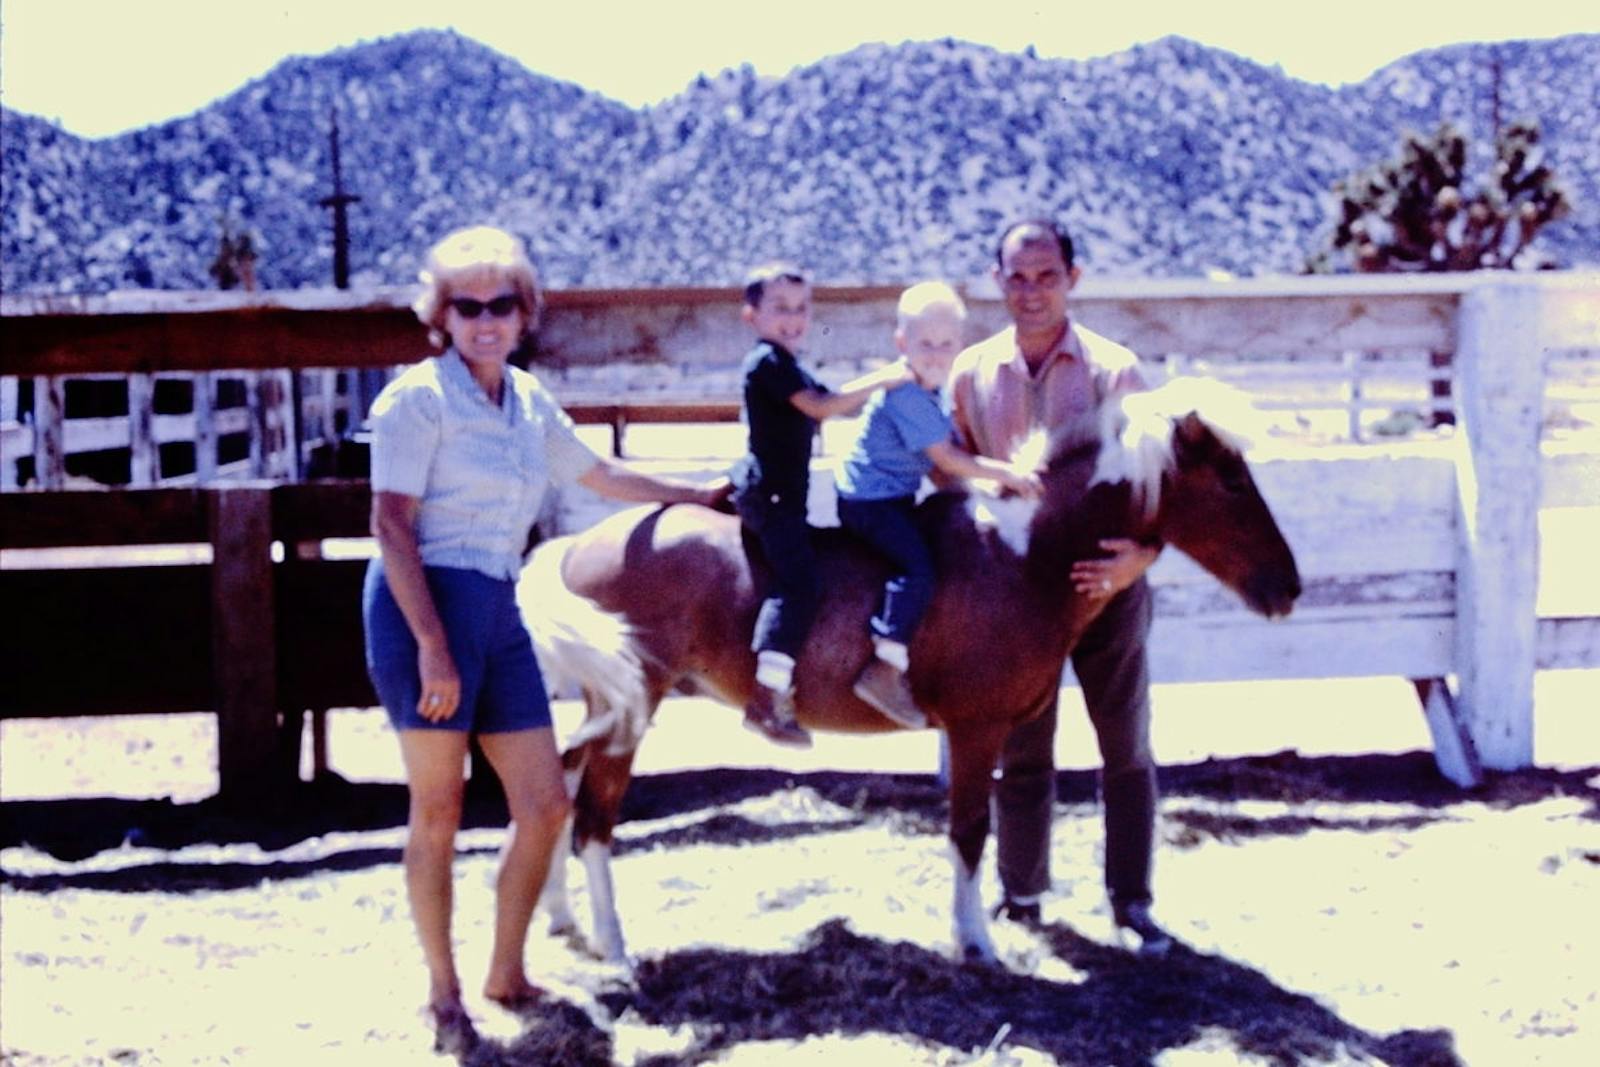 Pony ride at the OK Corral in 1968